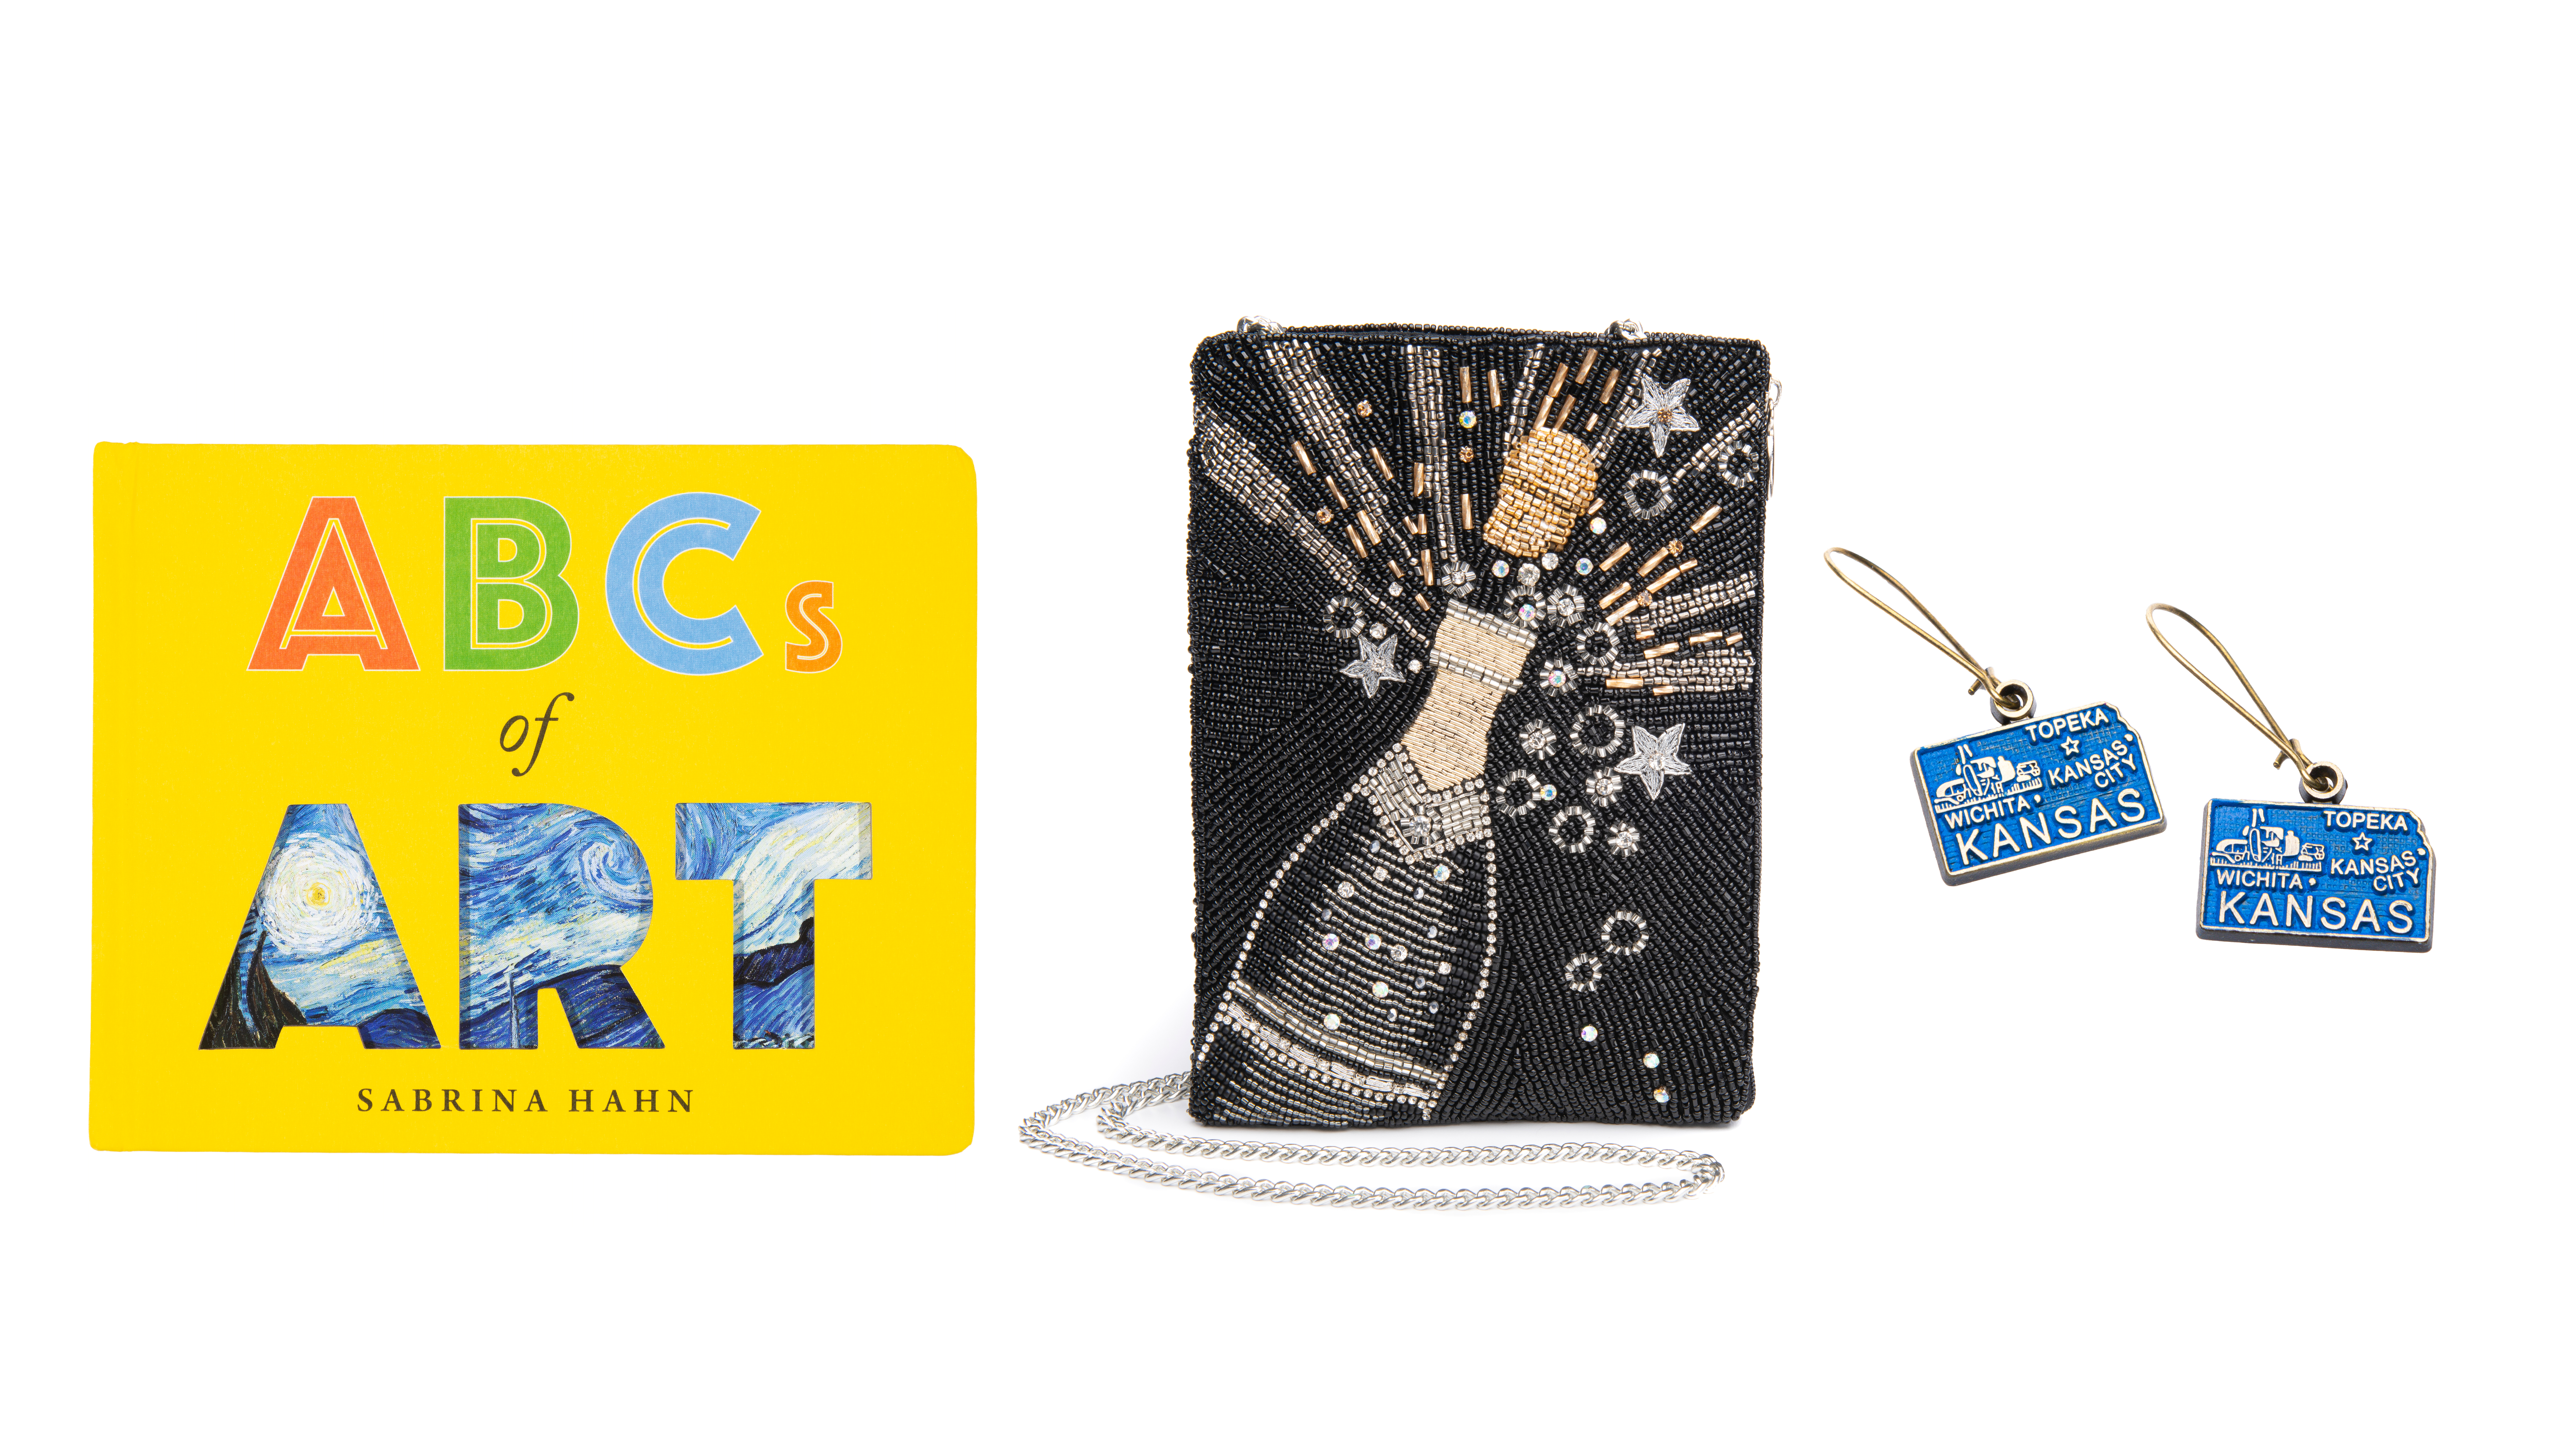 Store merchandise; from left Yellow Book ABC's of Art; beaded purse, black with image of a champagne bottle with the cork popped in silver and gold, far right, earrings with a map of Kansas in blue enamel on gold findings